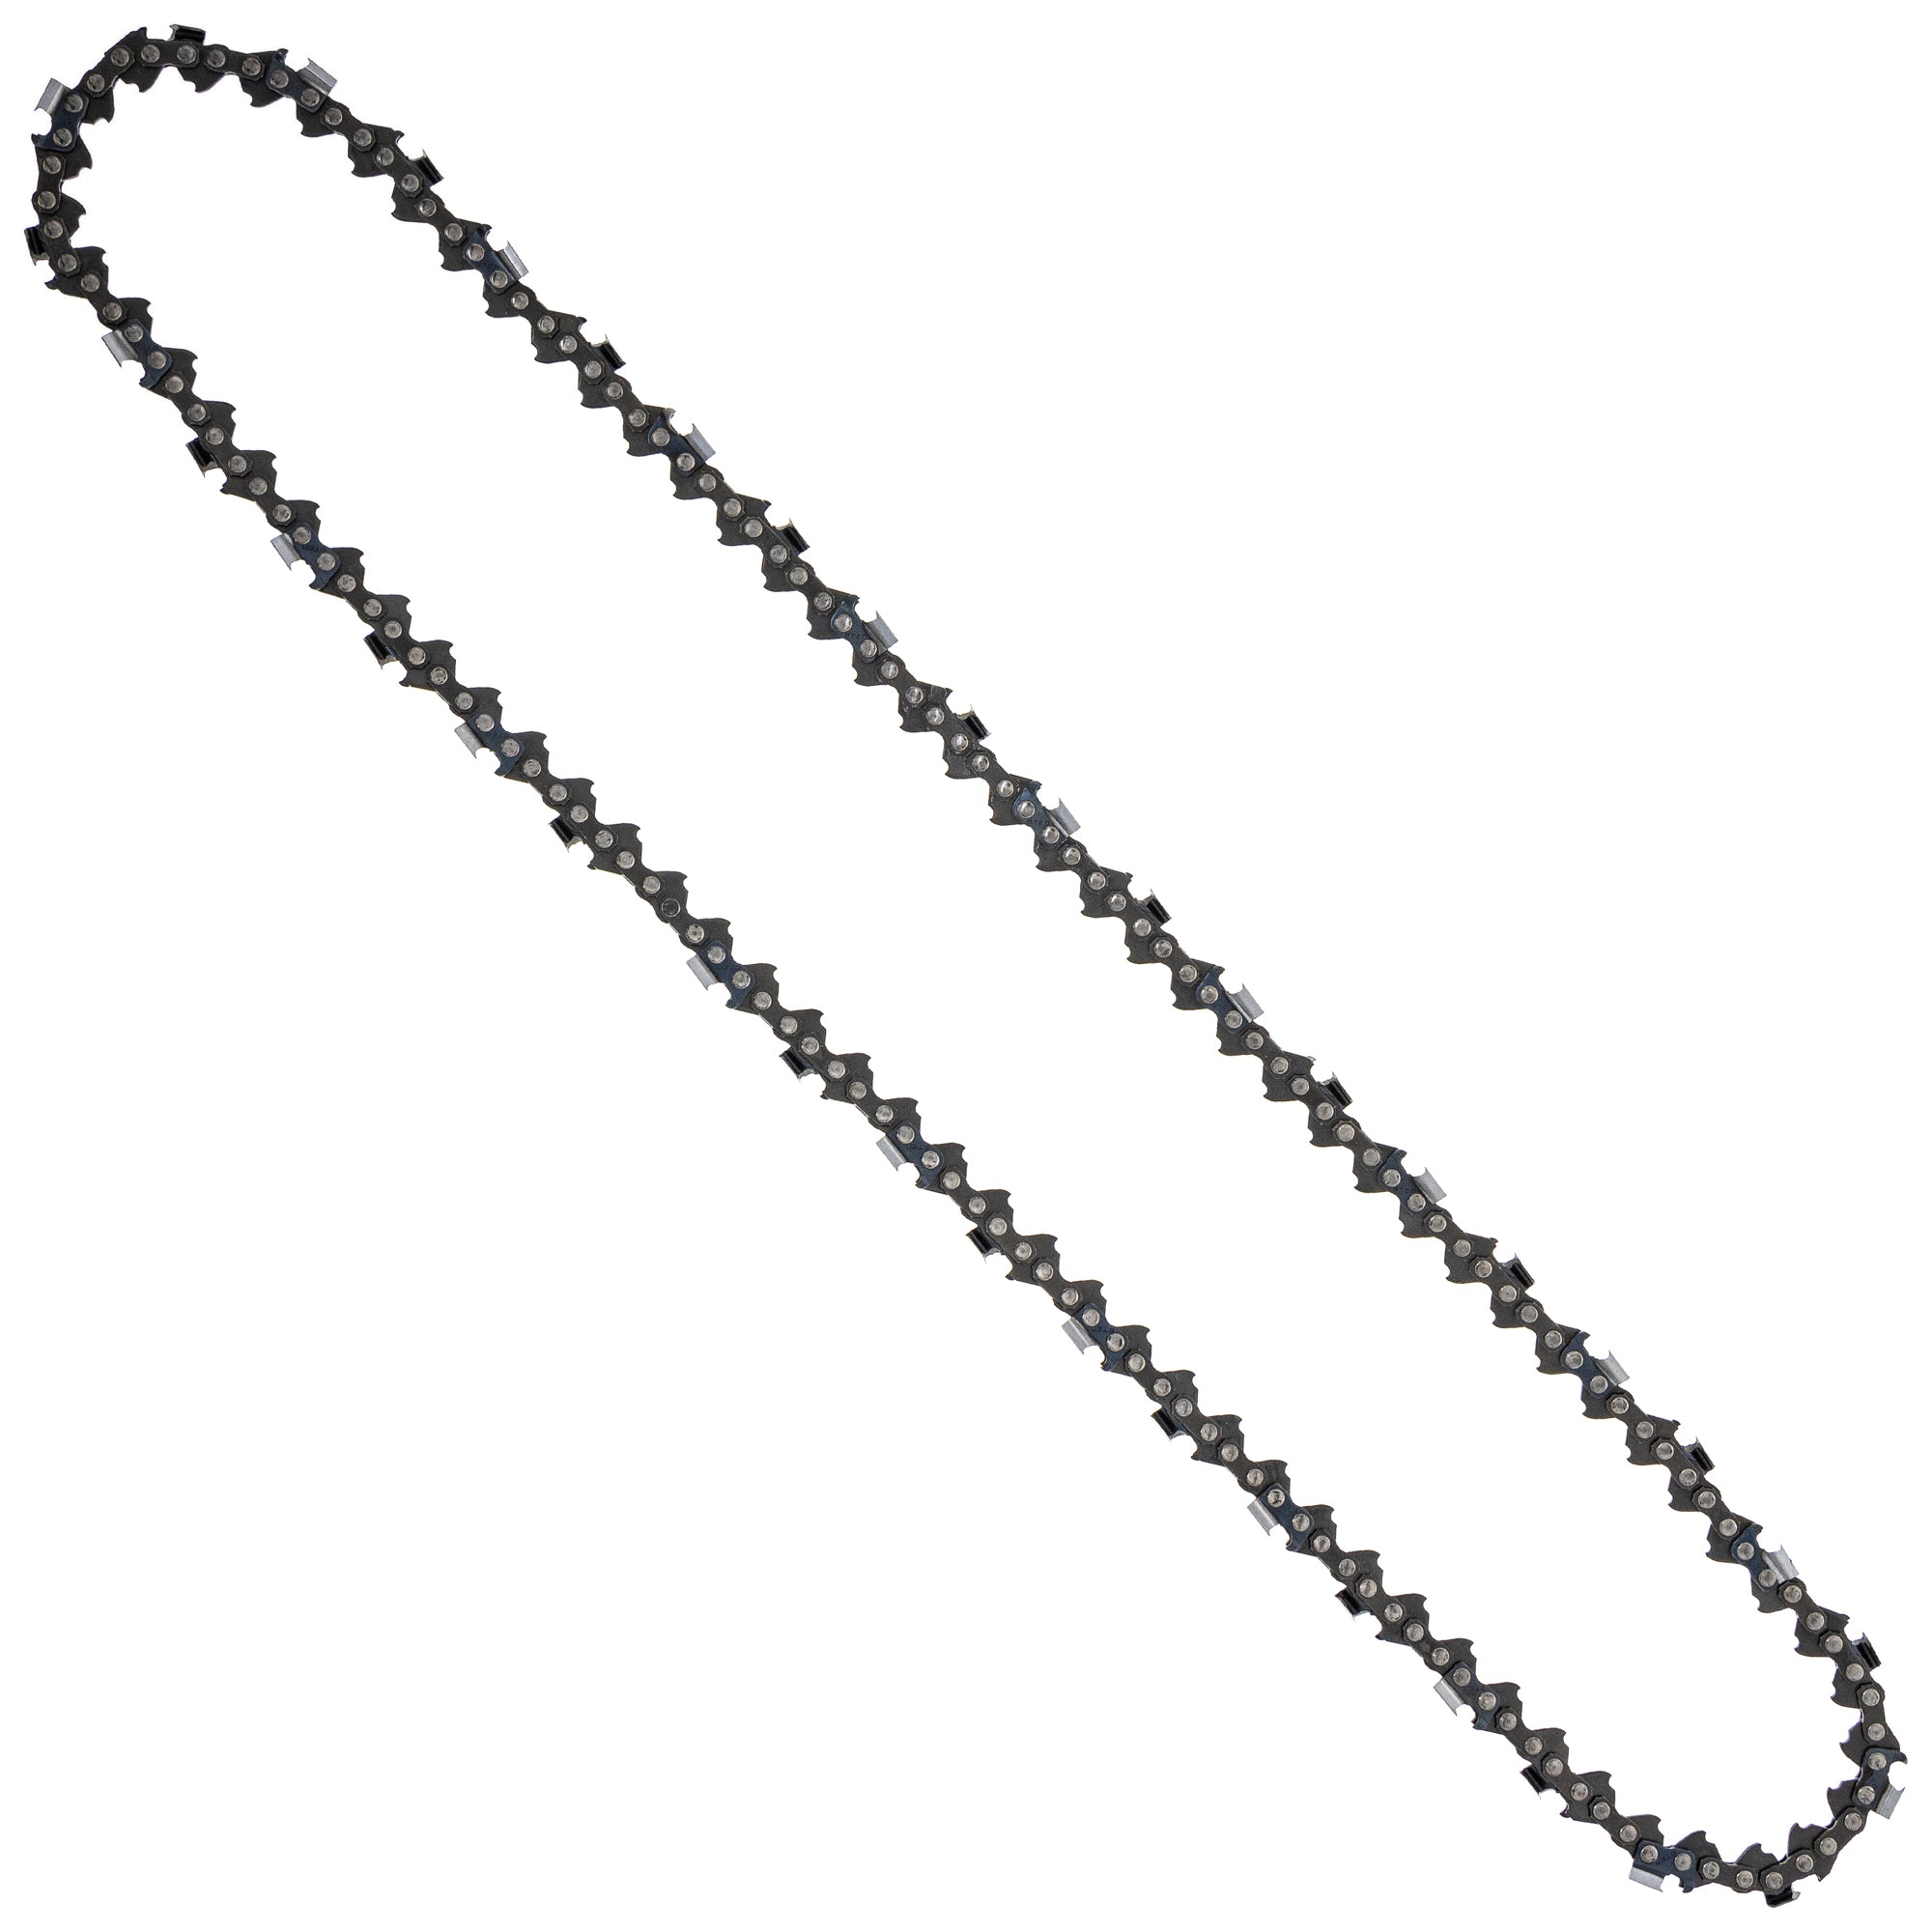 8TEN 810-CCC2279H Chain 5-Pack for zOTHER Stens Oregon MS 634 40 36